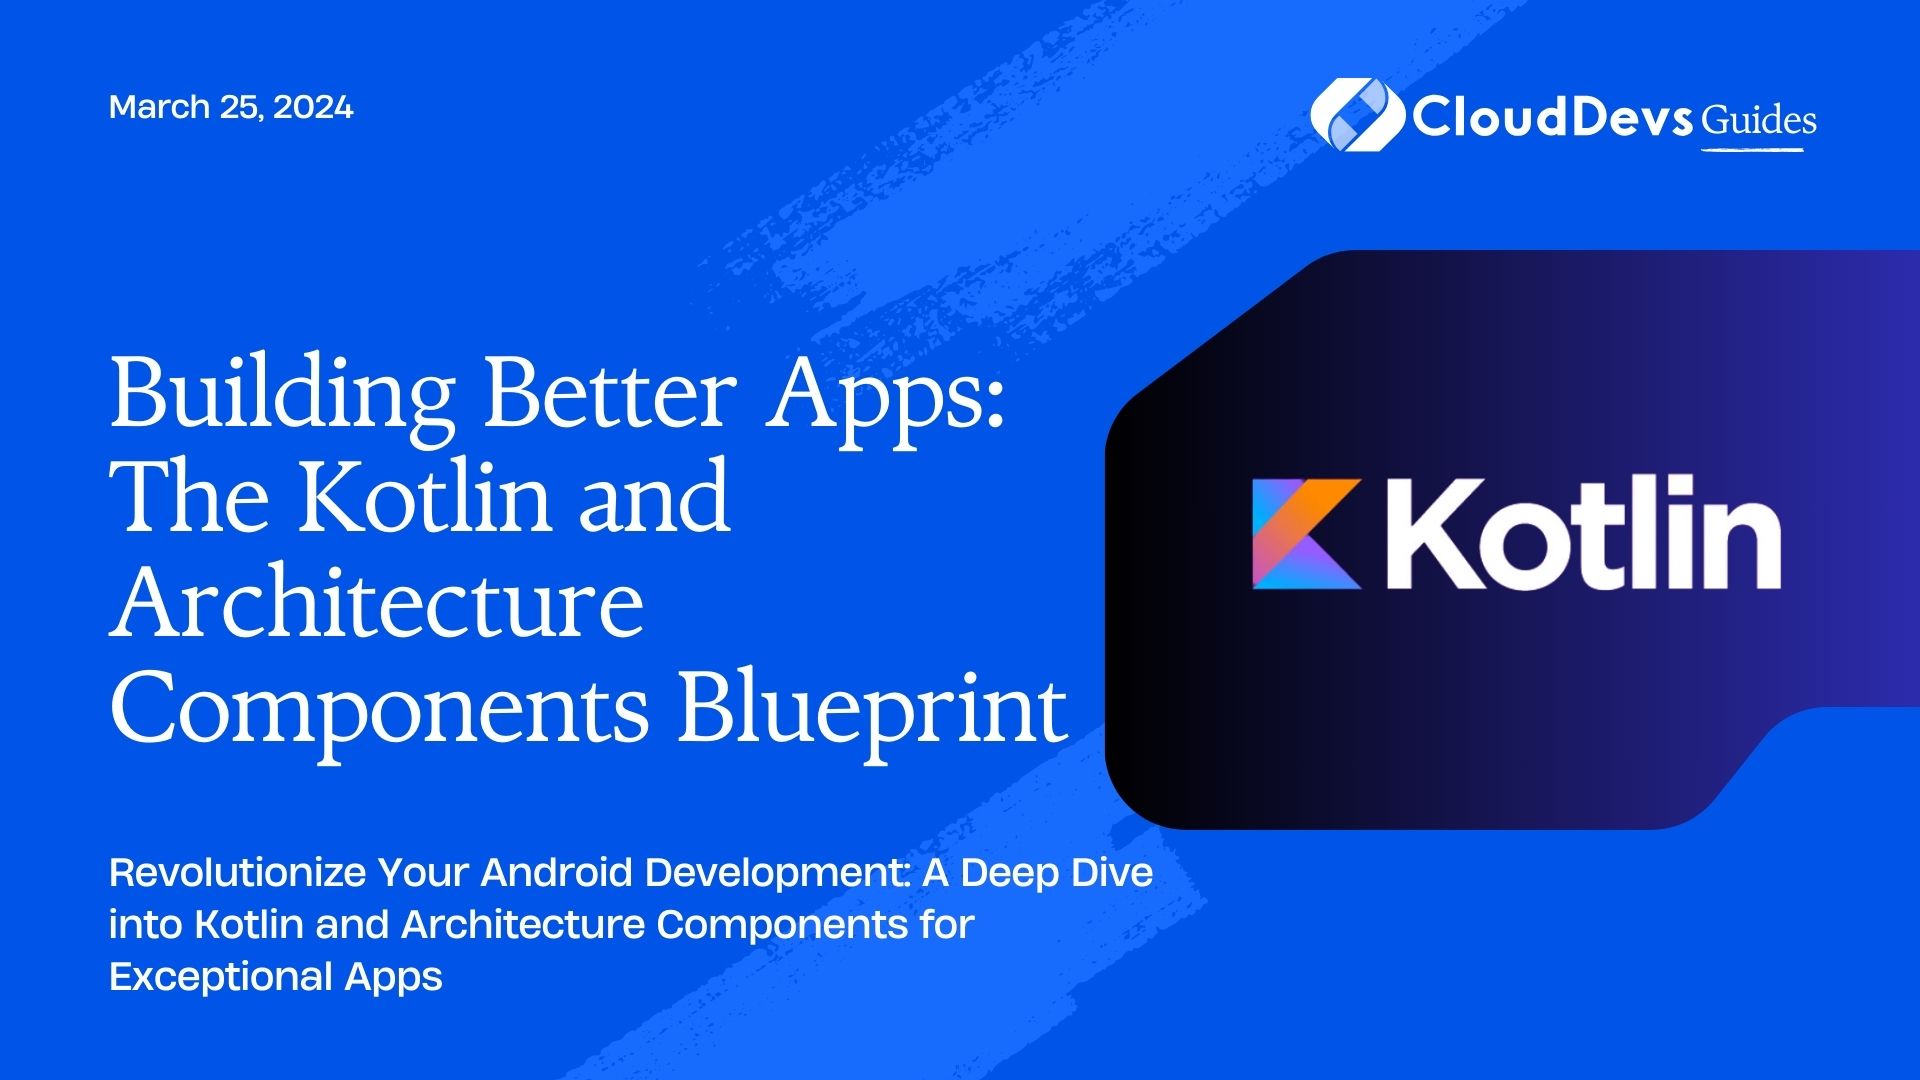 Building Better Apps: The Kotlin and Architecture Components Blueprint